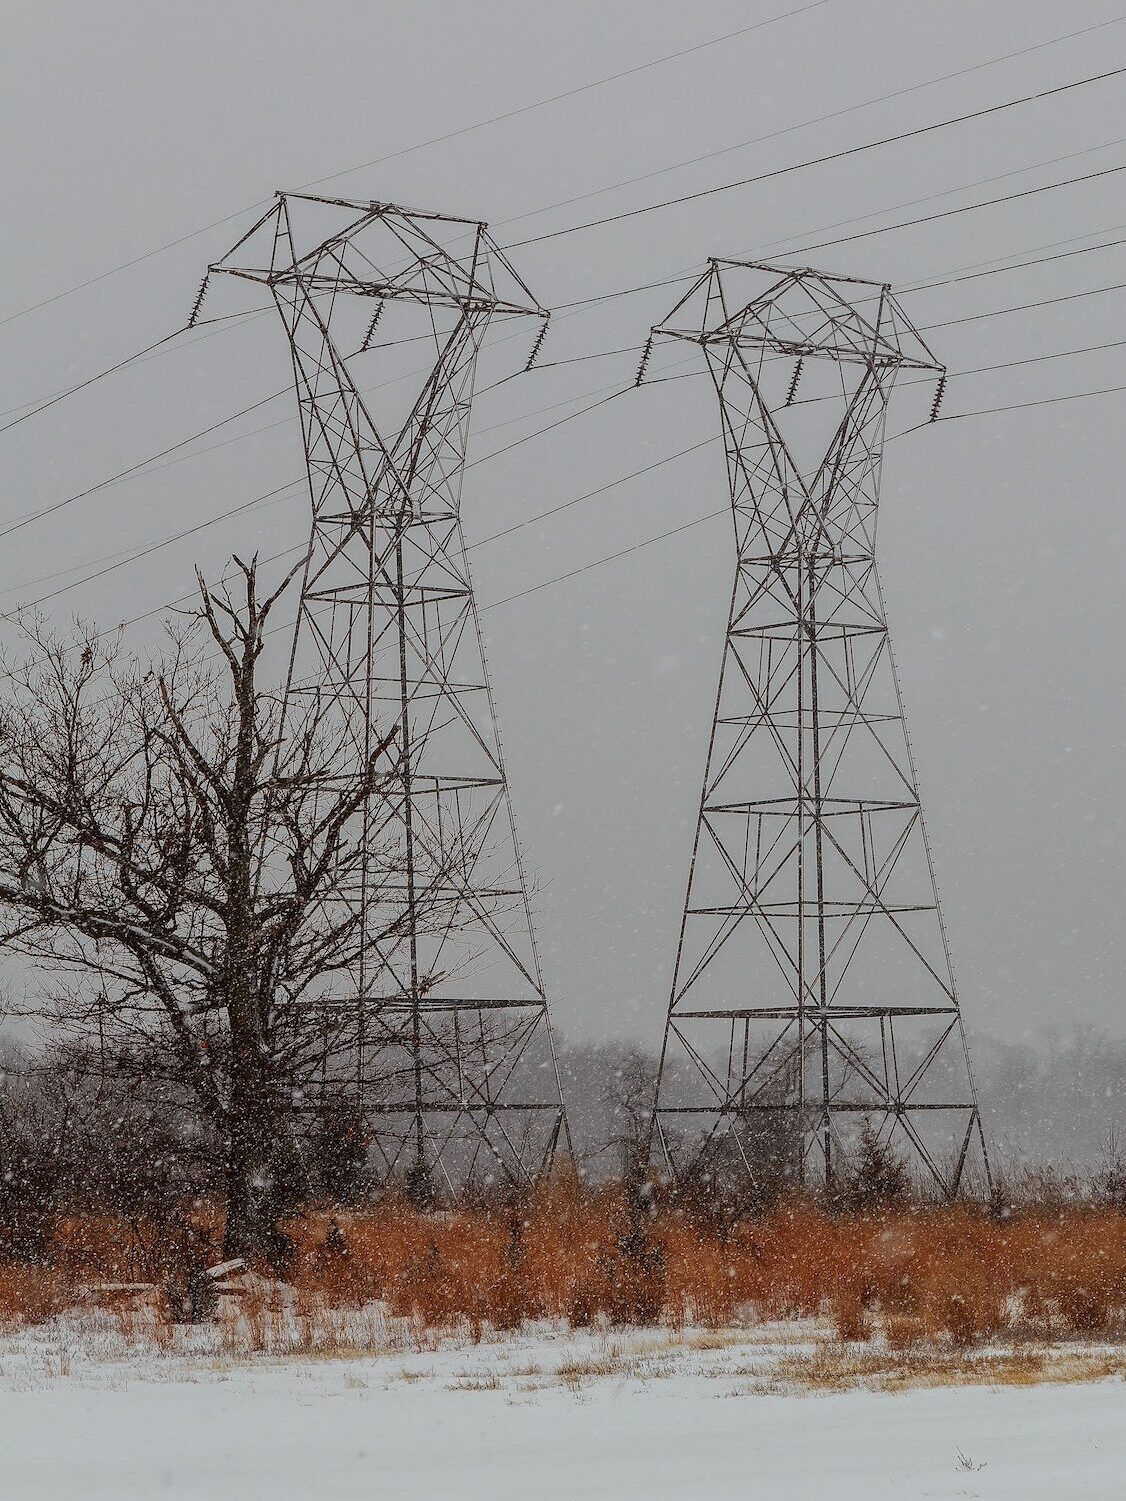 Power lines in winter scenery, electrical tower in wintertime with snow covered fields